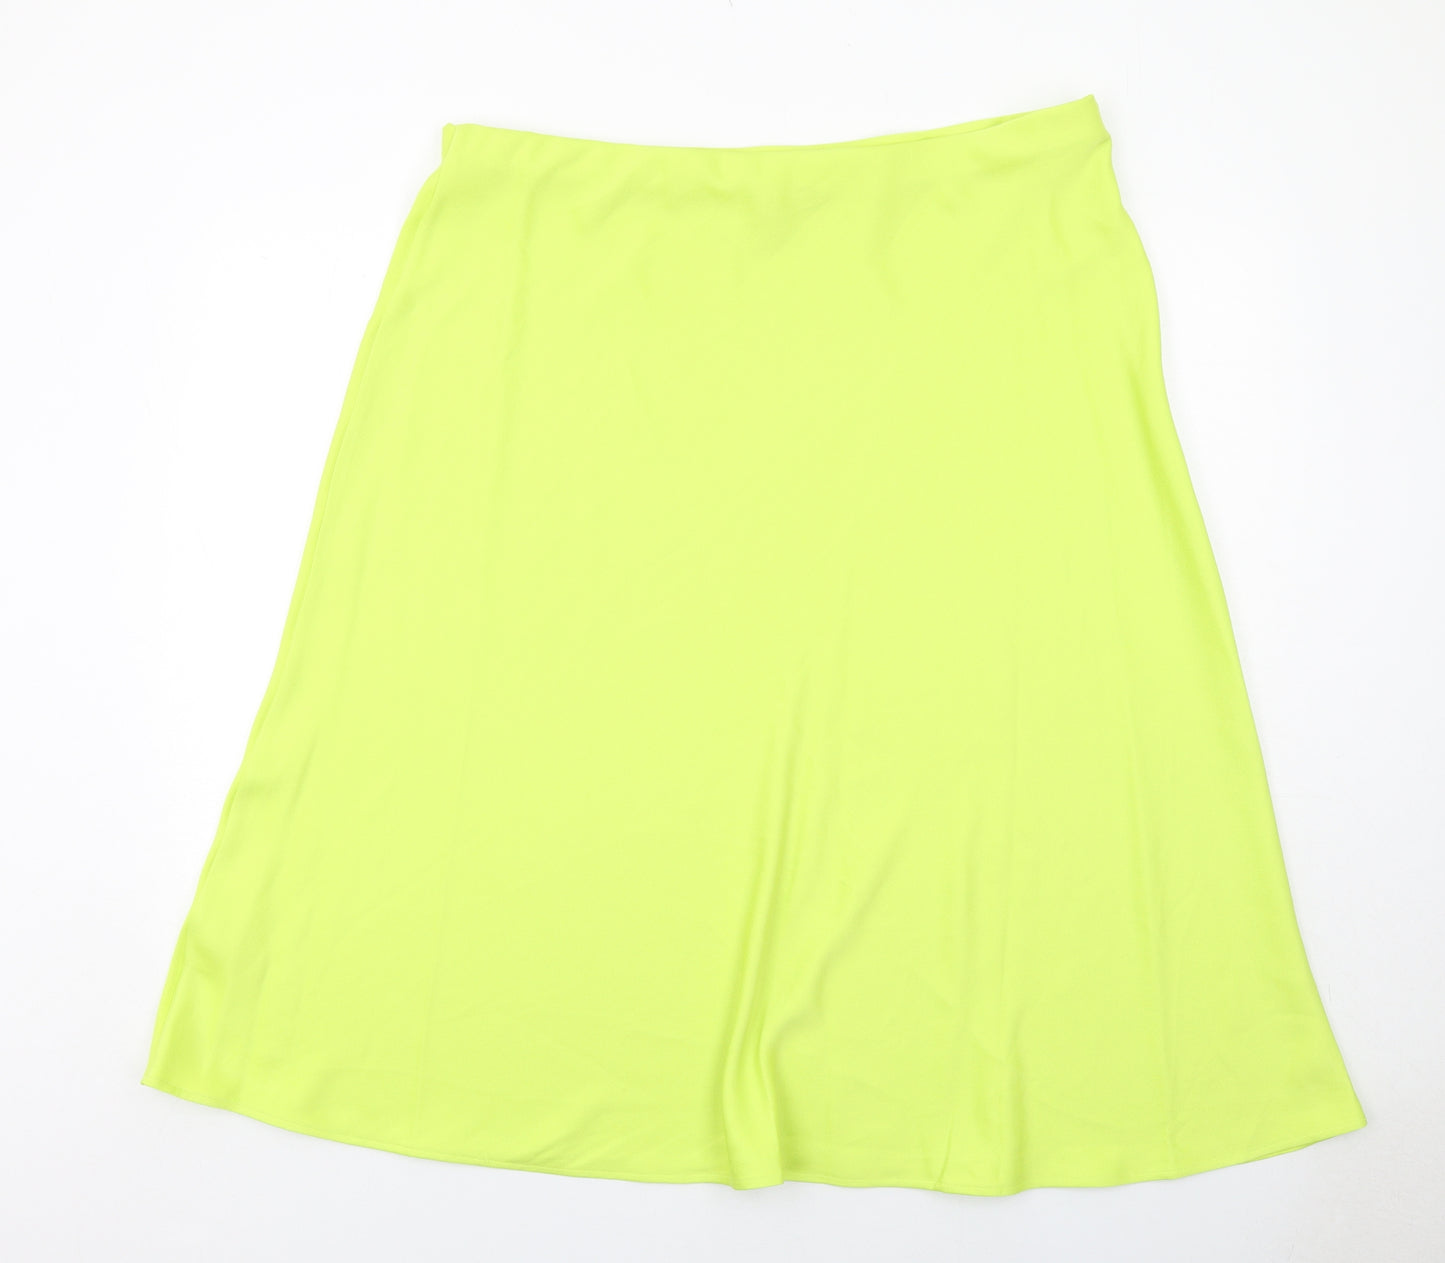 Marks and Spencer Womens Yellow Polyester Swing Skirt Size 20